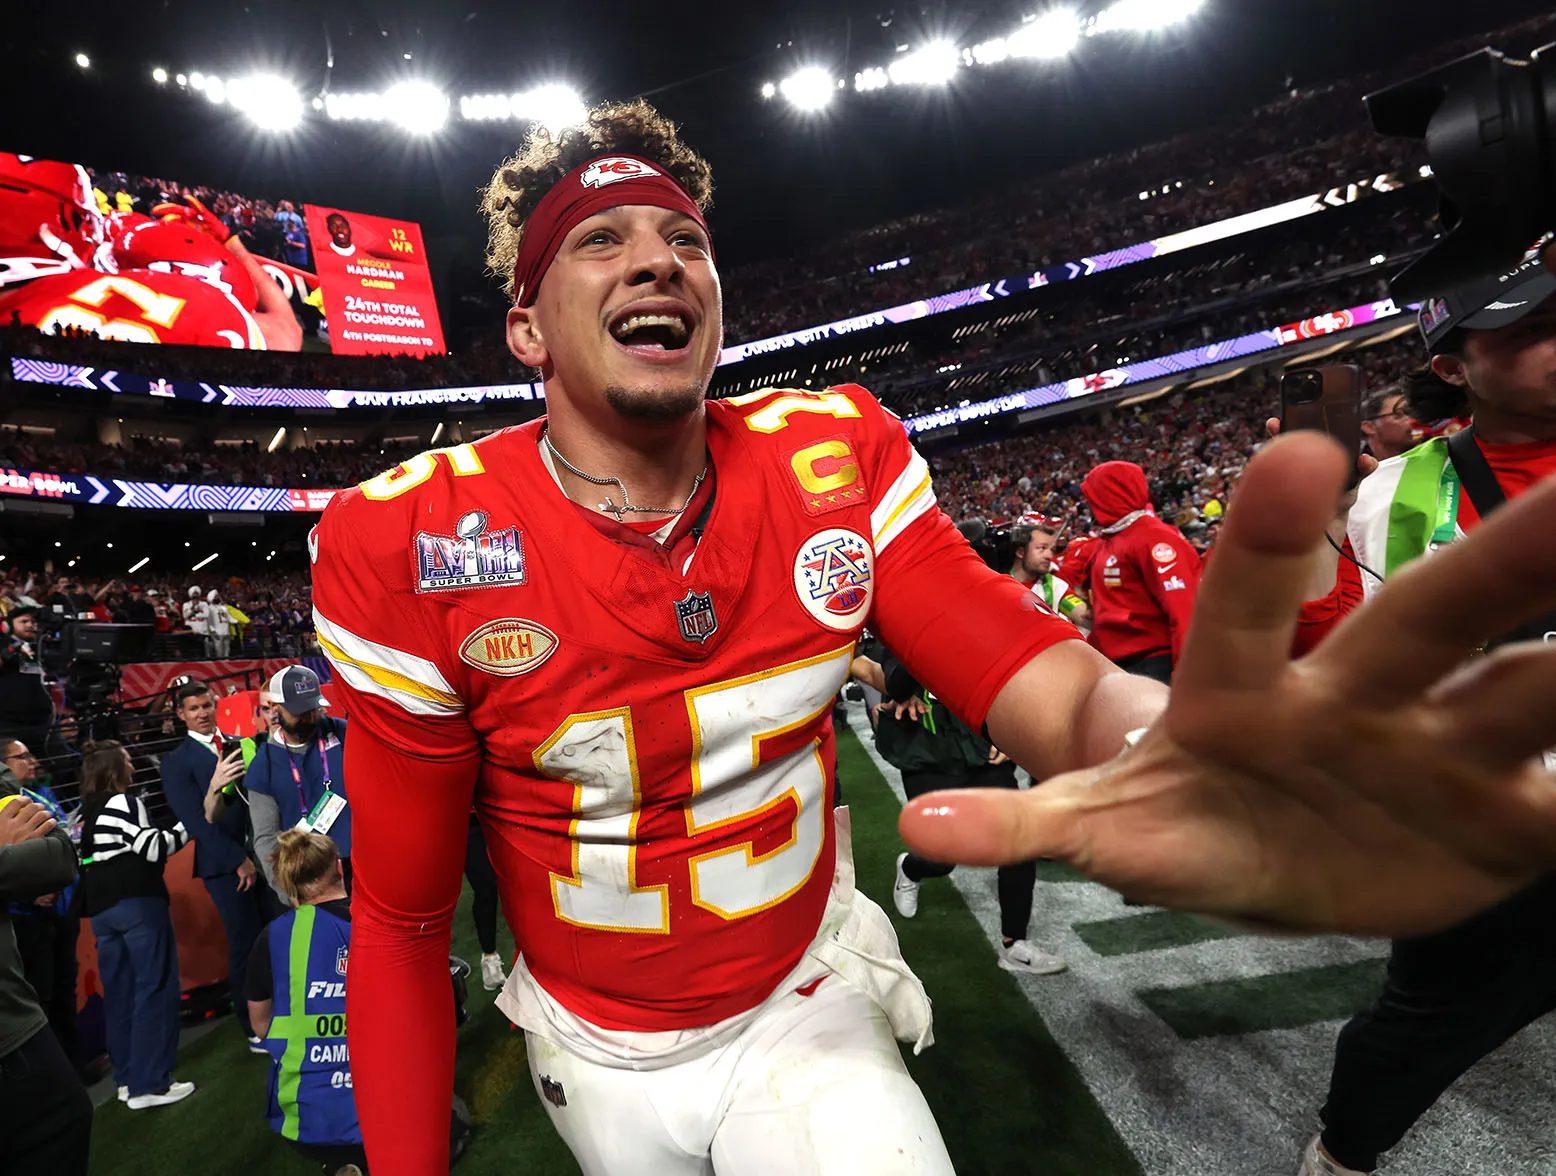 LAS VEGAS, NEVADA - FEBRUARY 11: Patrick Mahomes #15 of the Kansas City Chiefs celebrates after defeating the San Francisco 49ers 25-22 in overtime during Super Bowl LVIII at Allegiant Stadium on February 11, 2024 in Las Vegas, Nevada. (Photo by Jamie Squire/Getty Images)